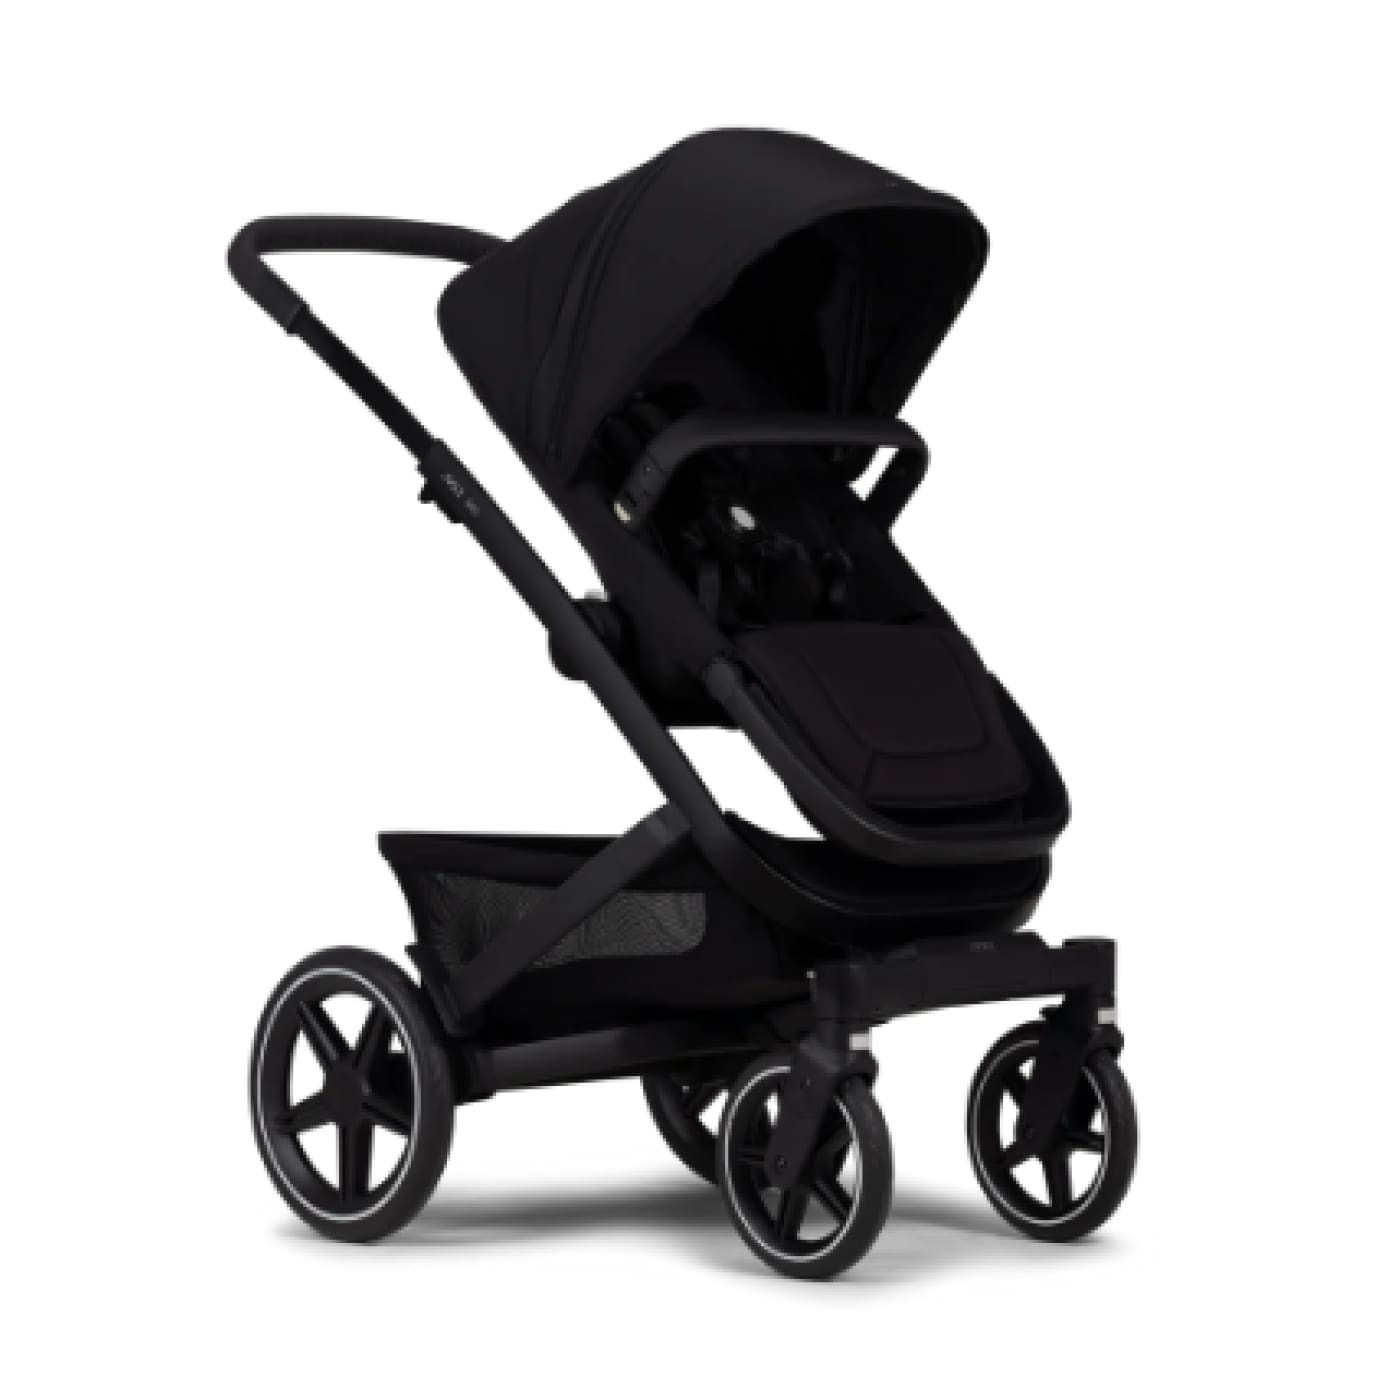 Joolz Geo3 Twin Stroller - Brilliant Black (2 Seat + 2 Carry Cot) - Brilliant Black - PRAMS & STROLLERS - PACKAGES